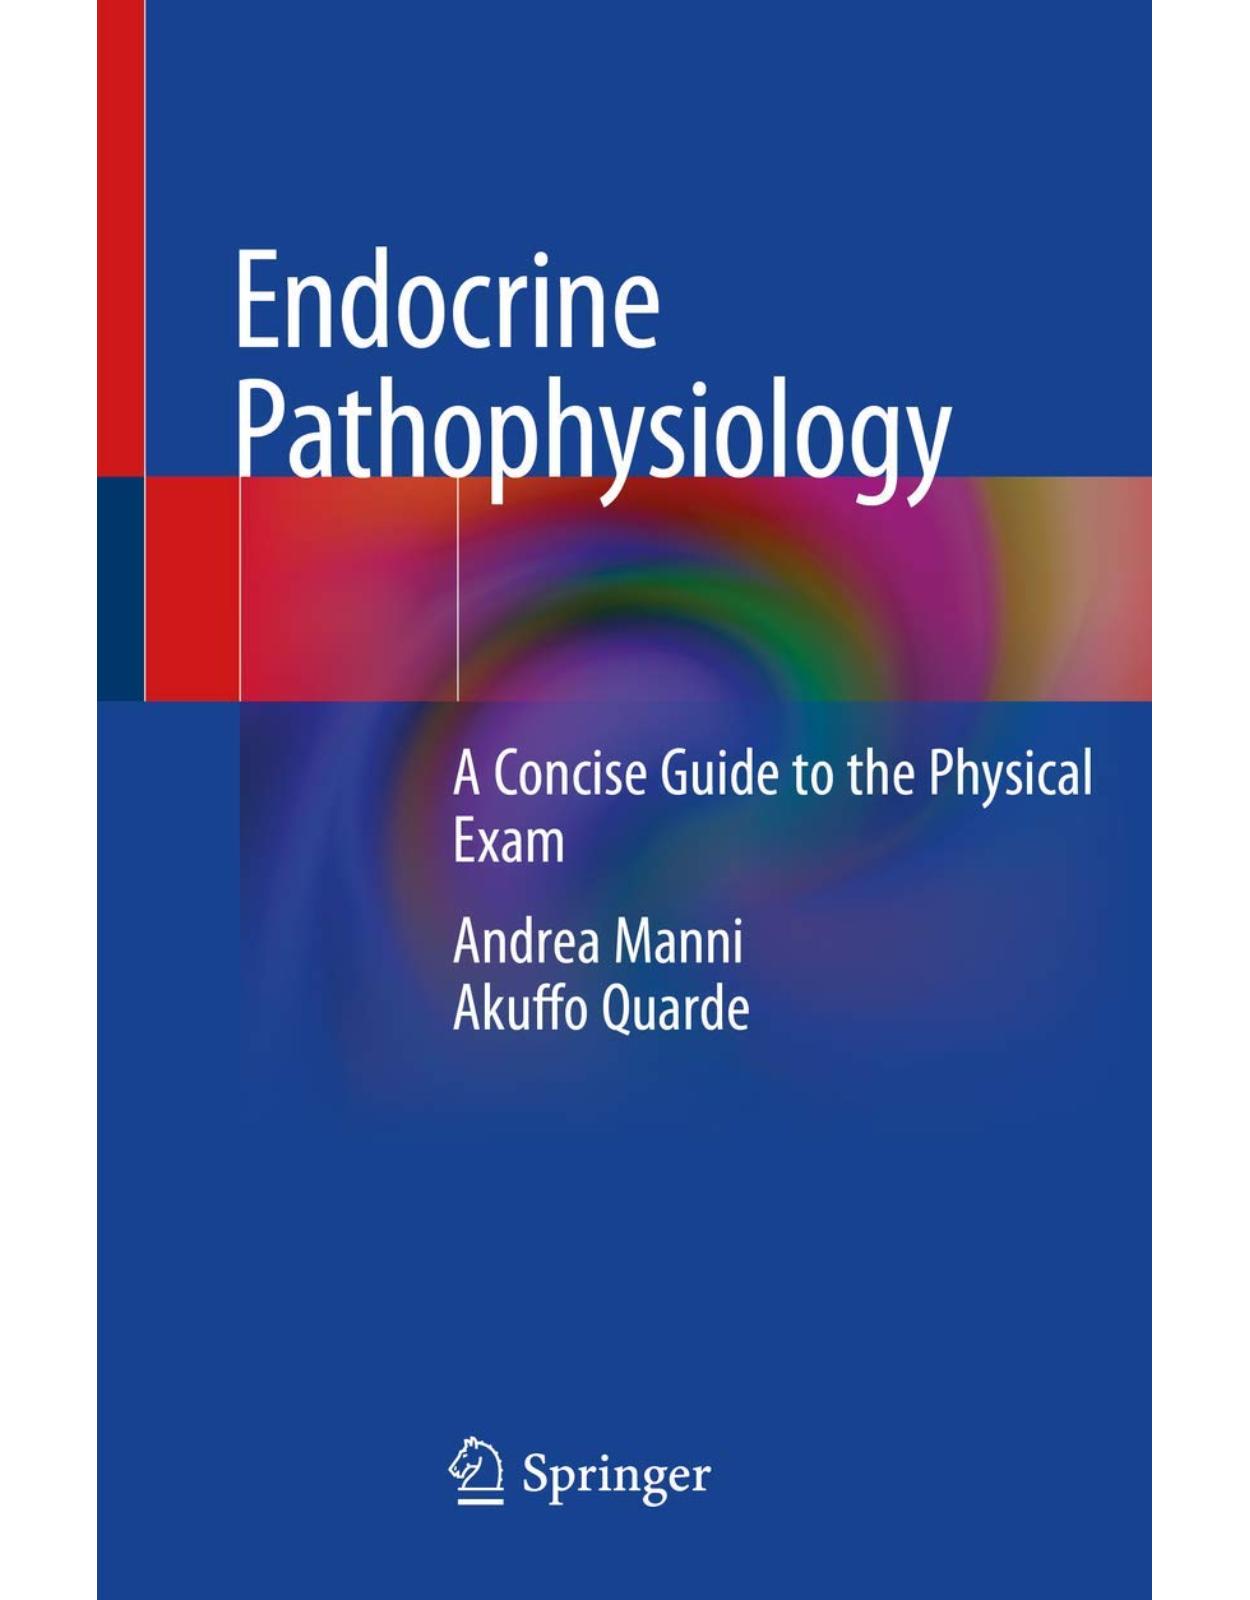 Endocrine Pathophysiology: A Concise Guide to the Physical Exam